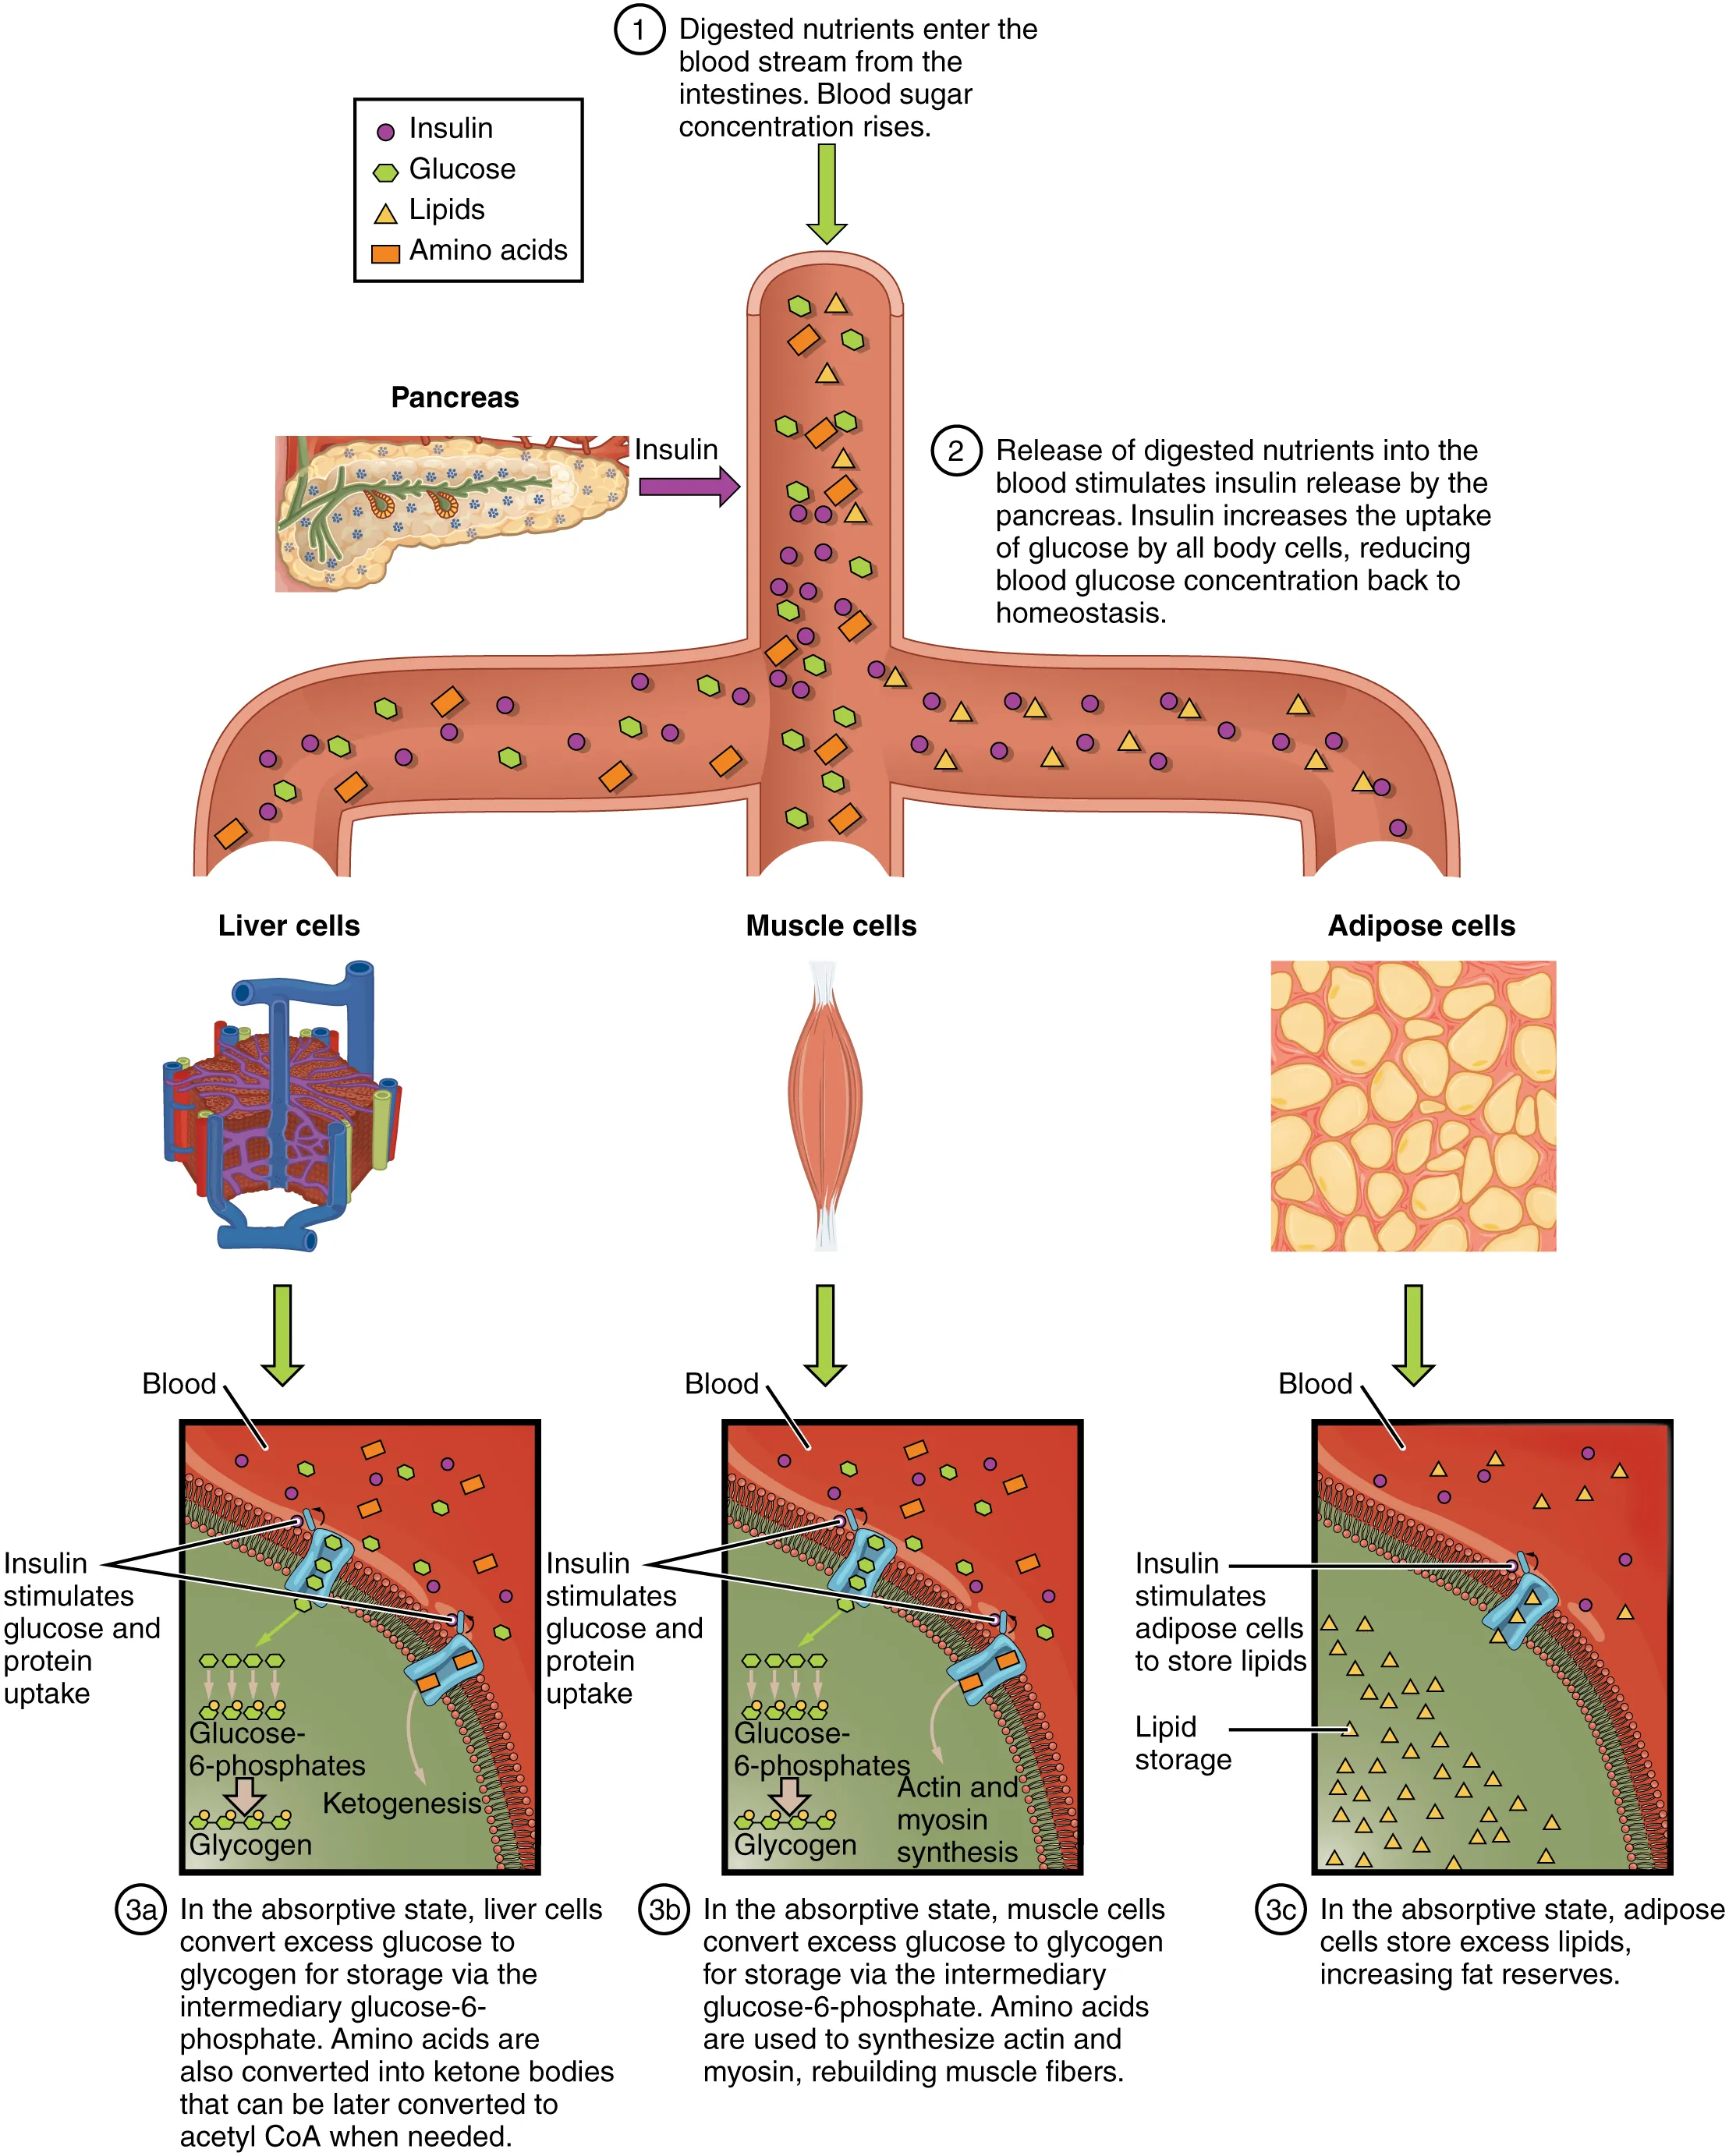 This figure shows how nutrients are absorbed by the body. The diagram shows digested nutrients entering the blood stream and being absorbed by liver cells, muscle cells, and adipose cells. Underneath each panel, text details the process taking place in each cell type.